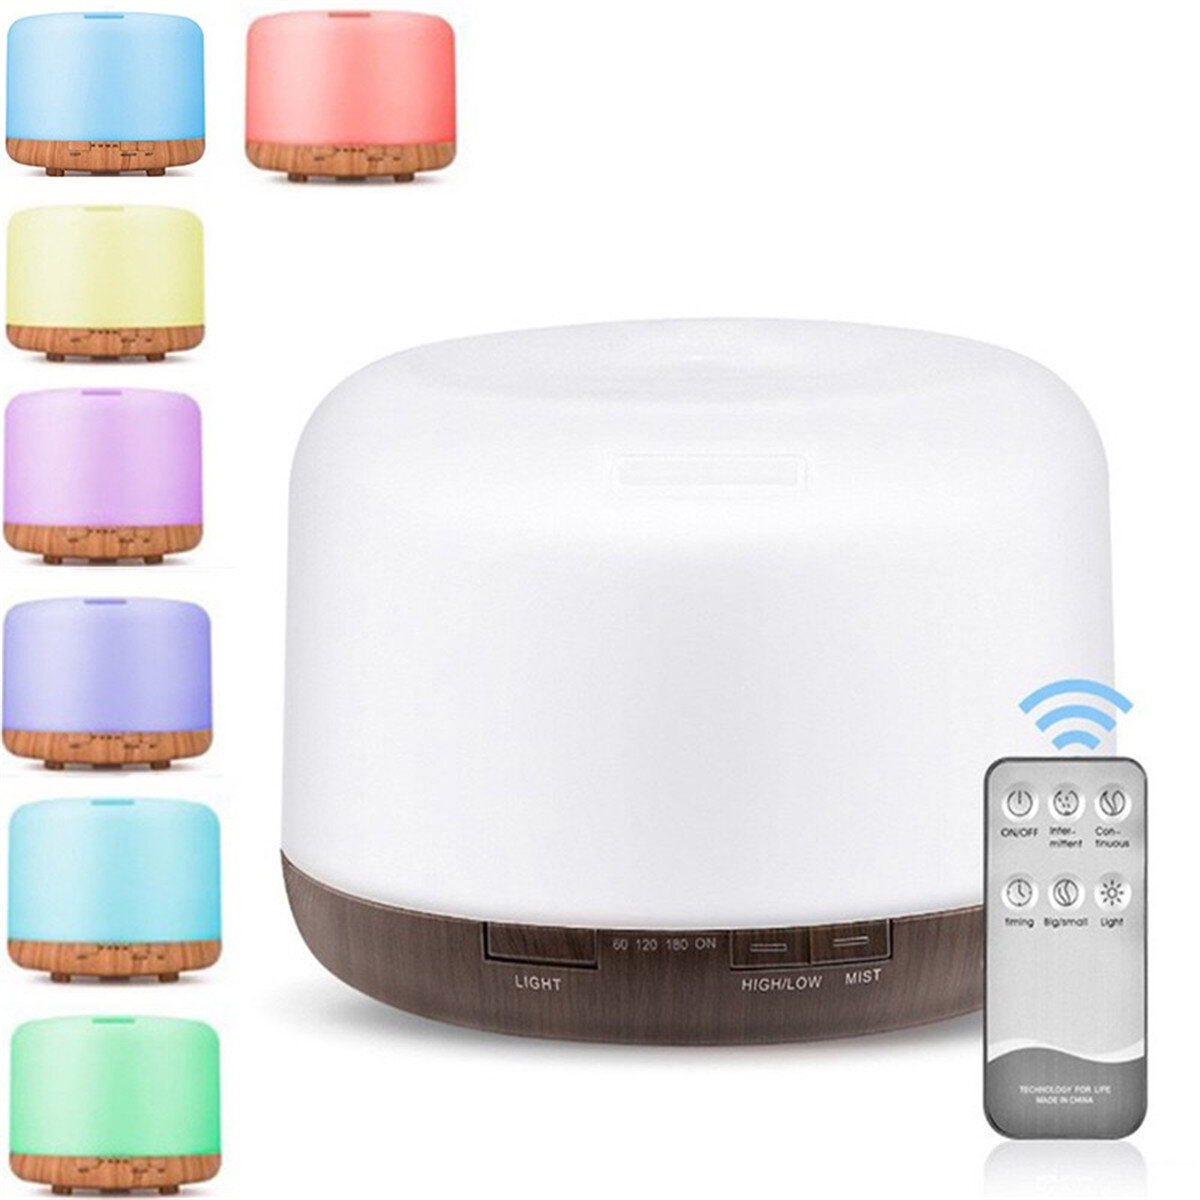 AC100-240/DC24V 500ML LED Ultrasonic Humidifier Essential Oil Diffuser Aromatherapy Fresh Air